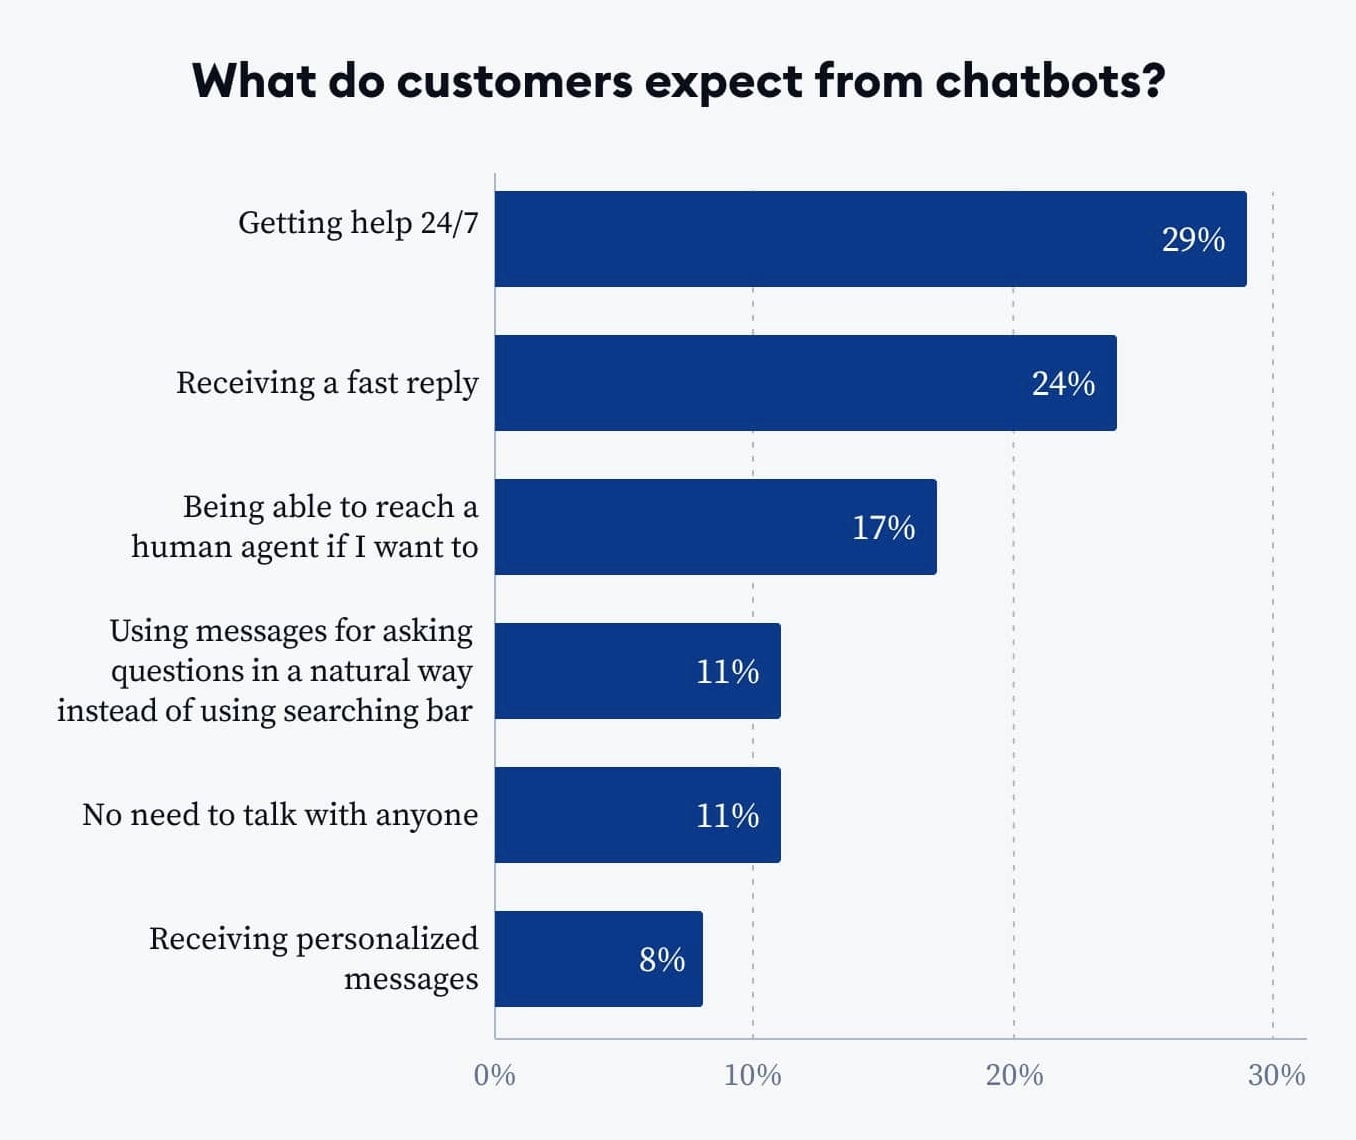 Chart representing what customers expect from chatbots when it comes to customer support.